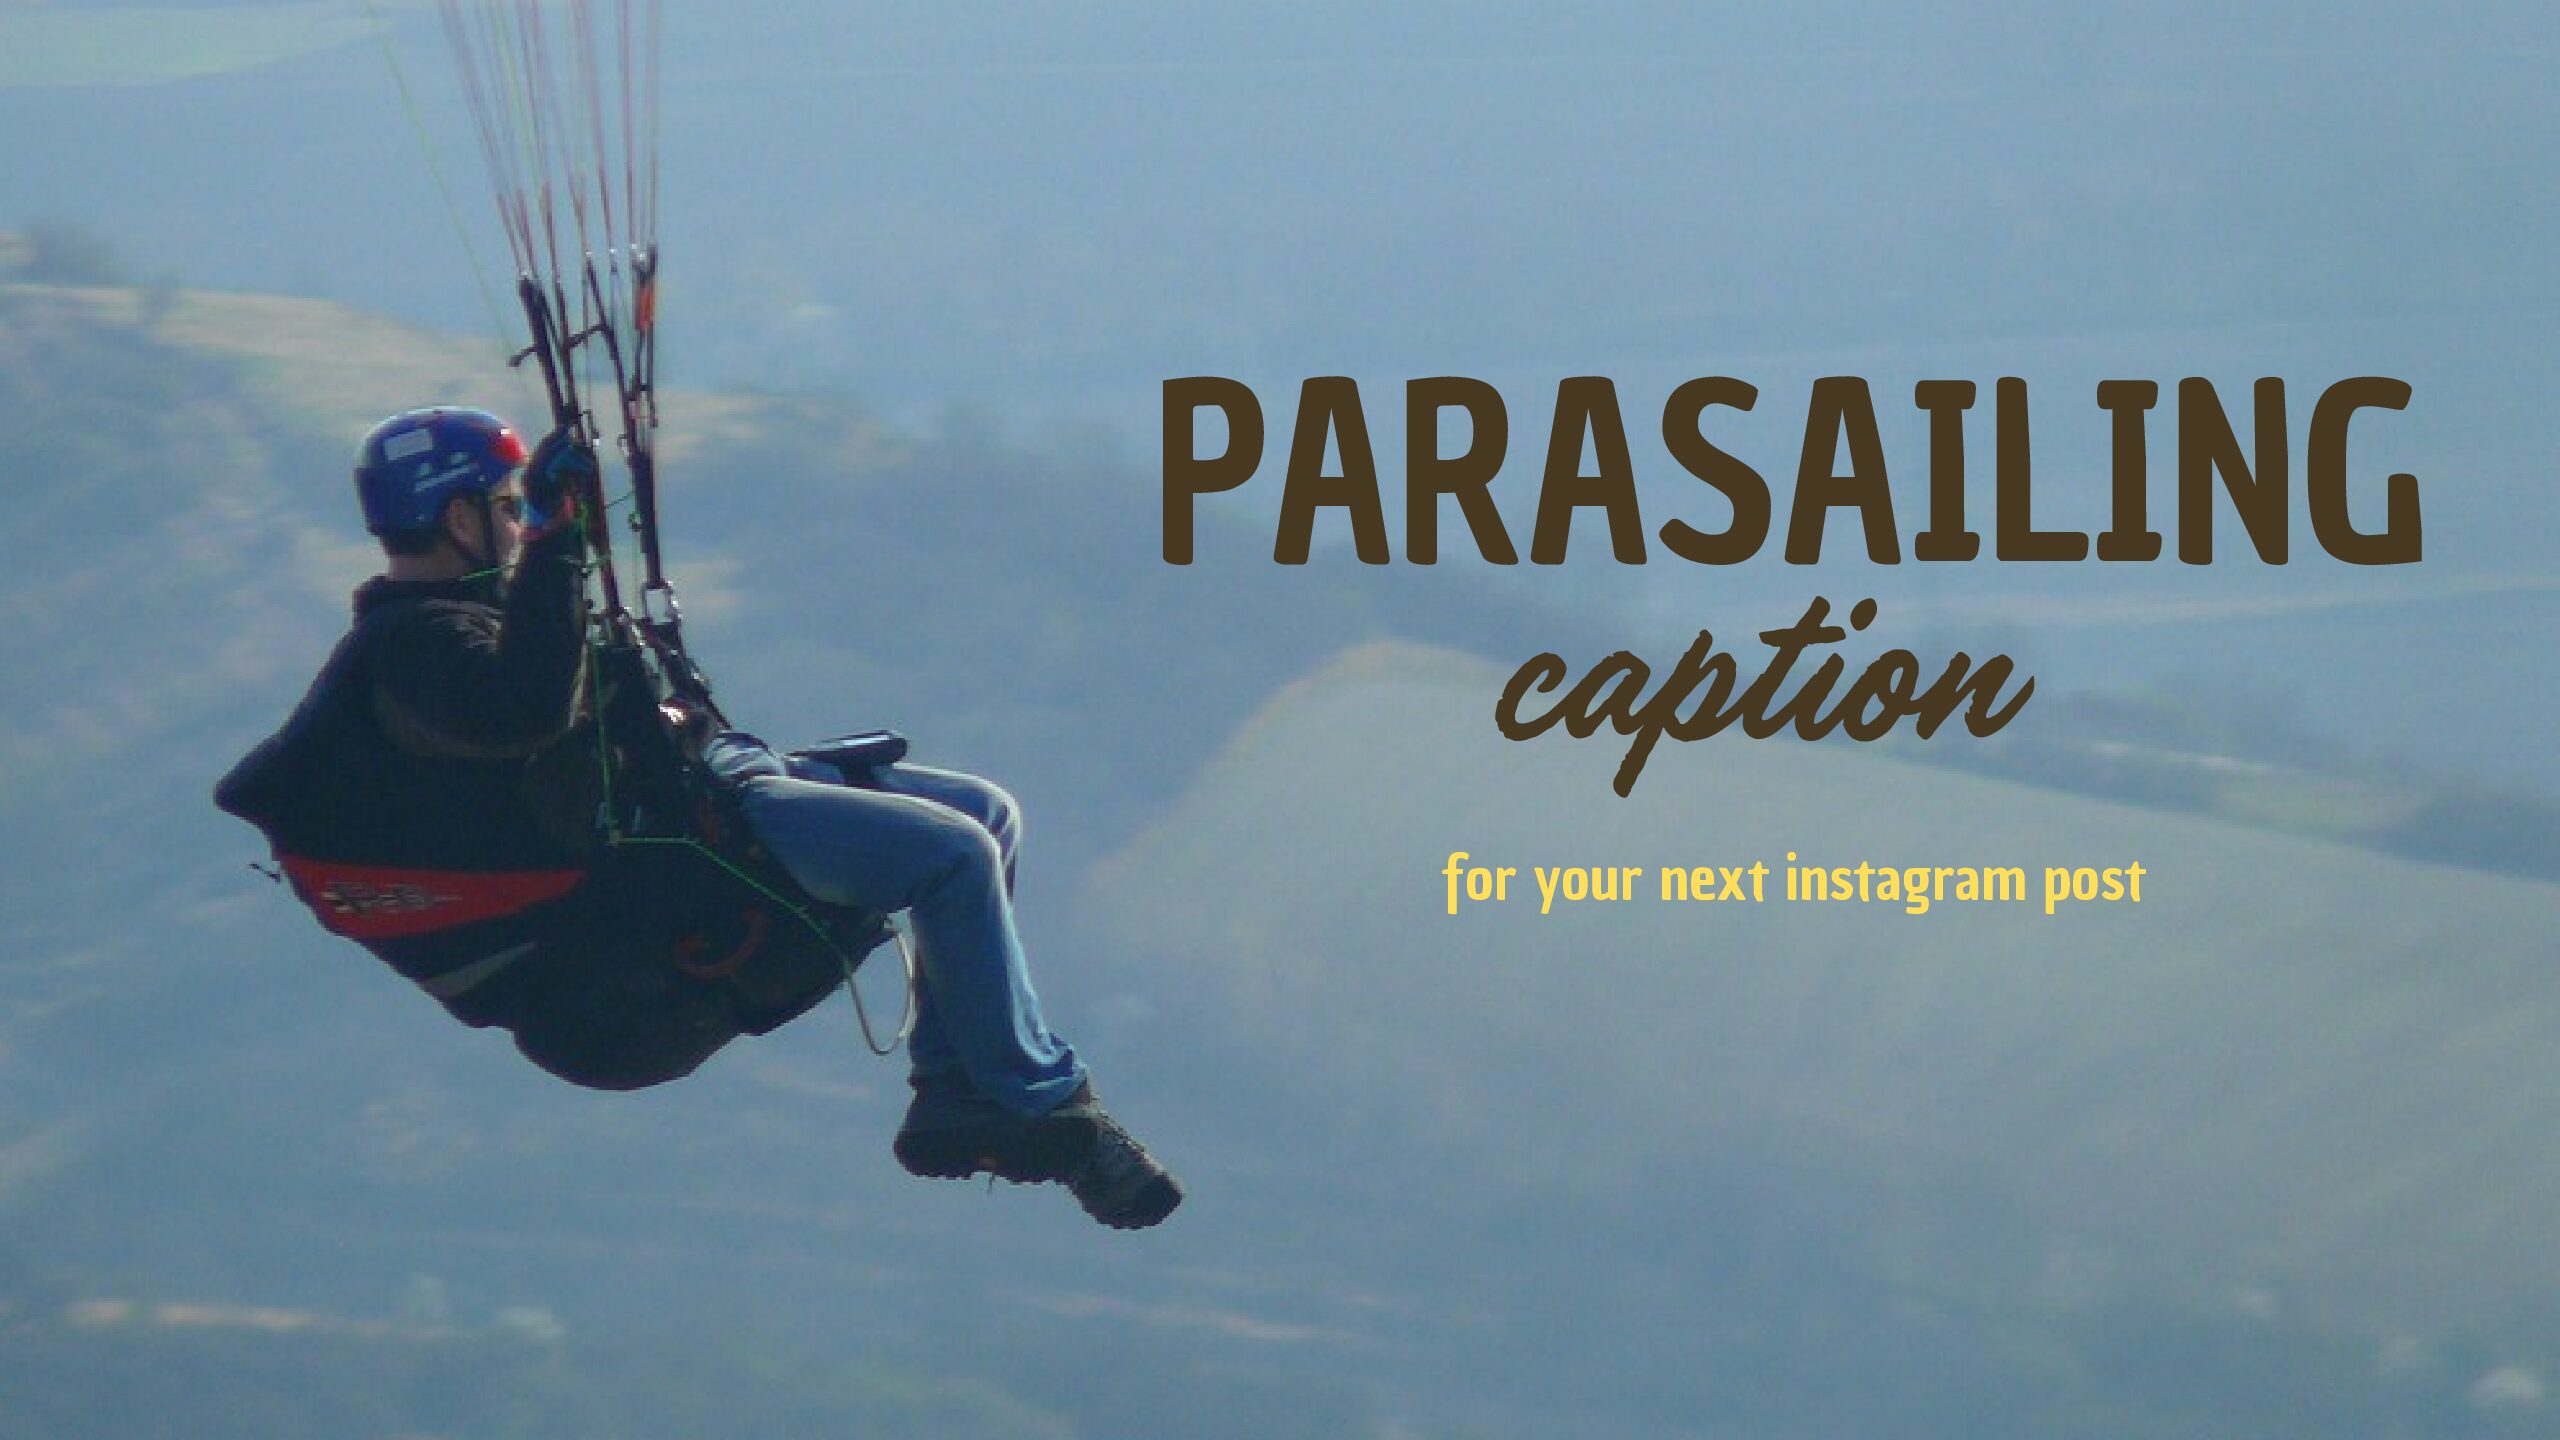 Creative Parasailing Captions For Instagram | Blast With Your Next Post